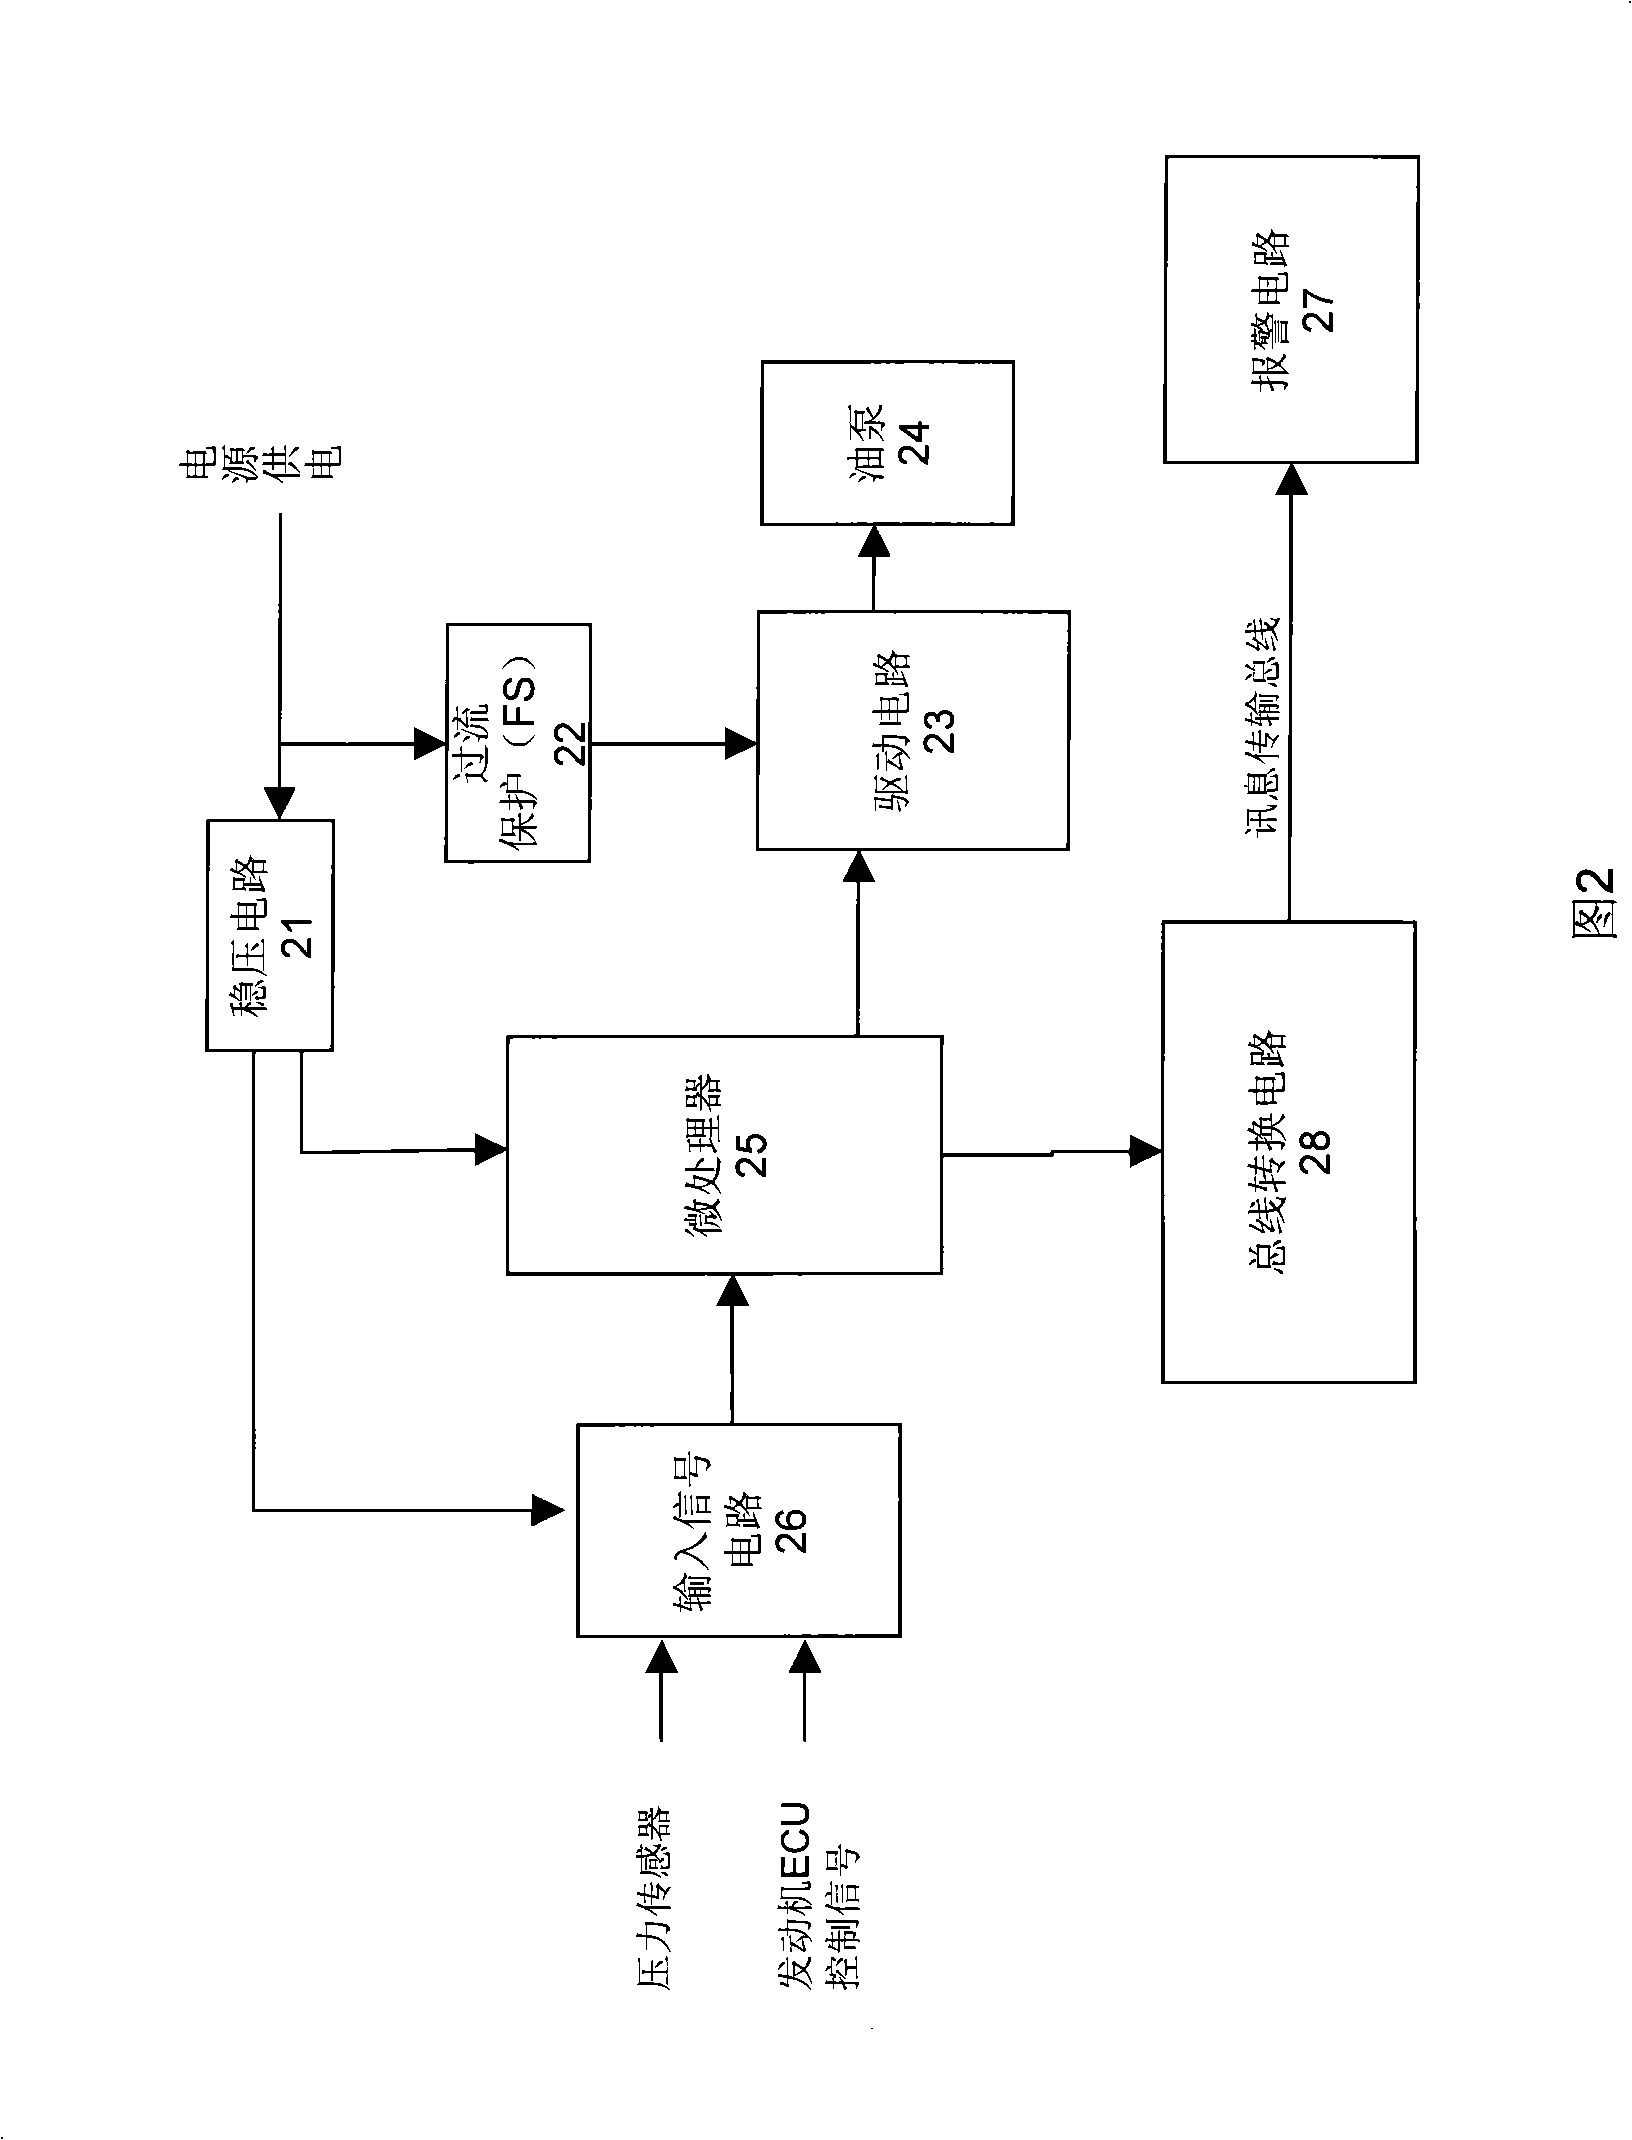 Supply method and system for intelligent control of gasoline engine fuel oil